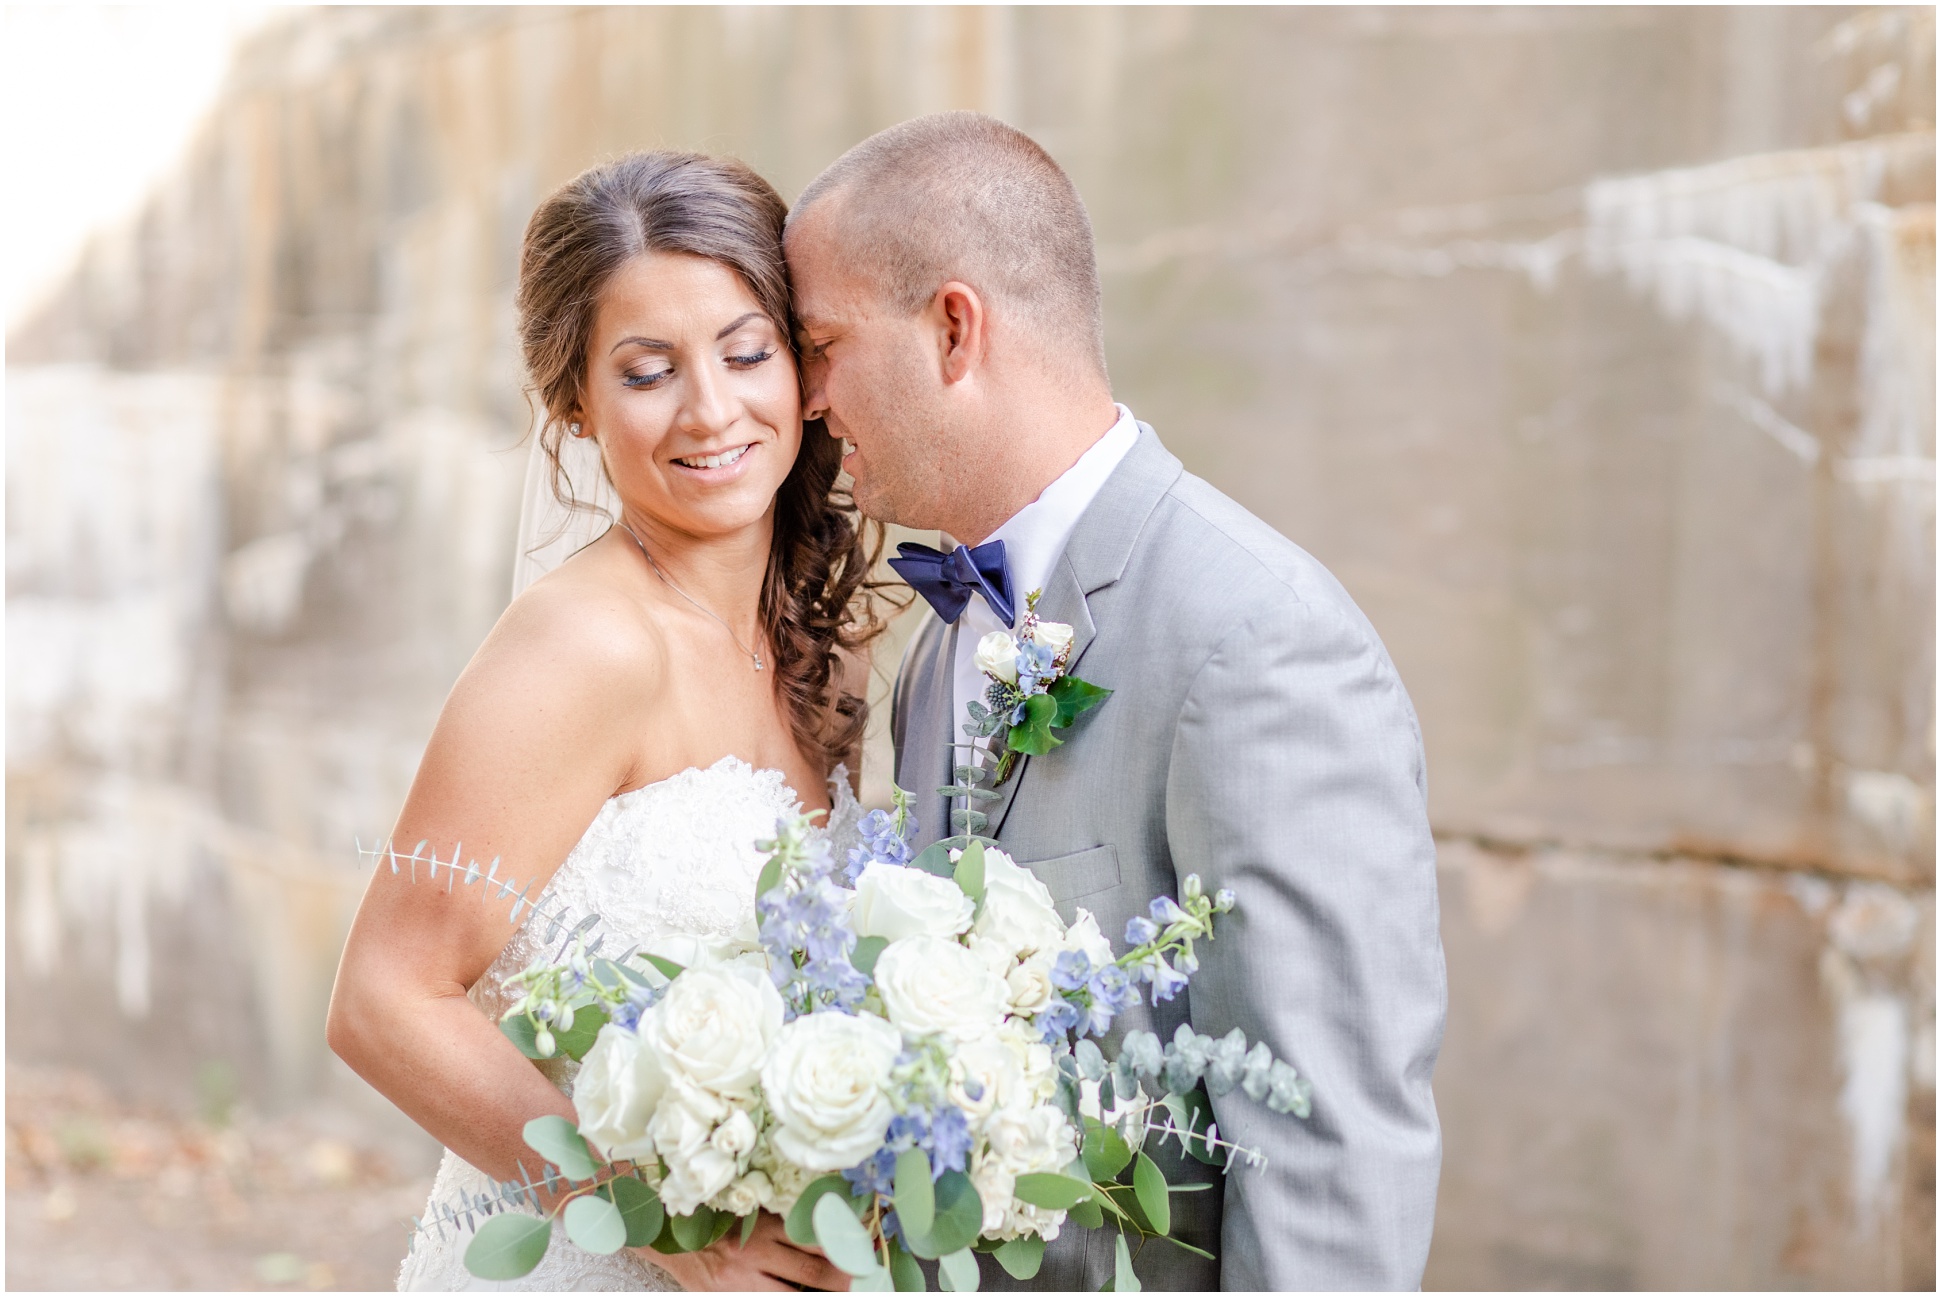 Groom nuzzling into the bride in front of a stone wall while holding her bouquet